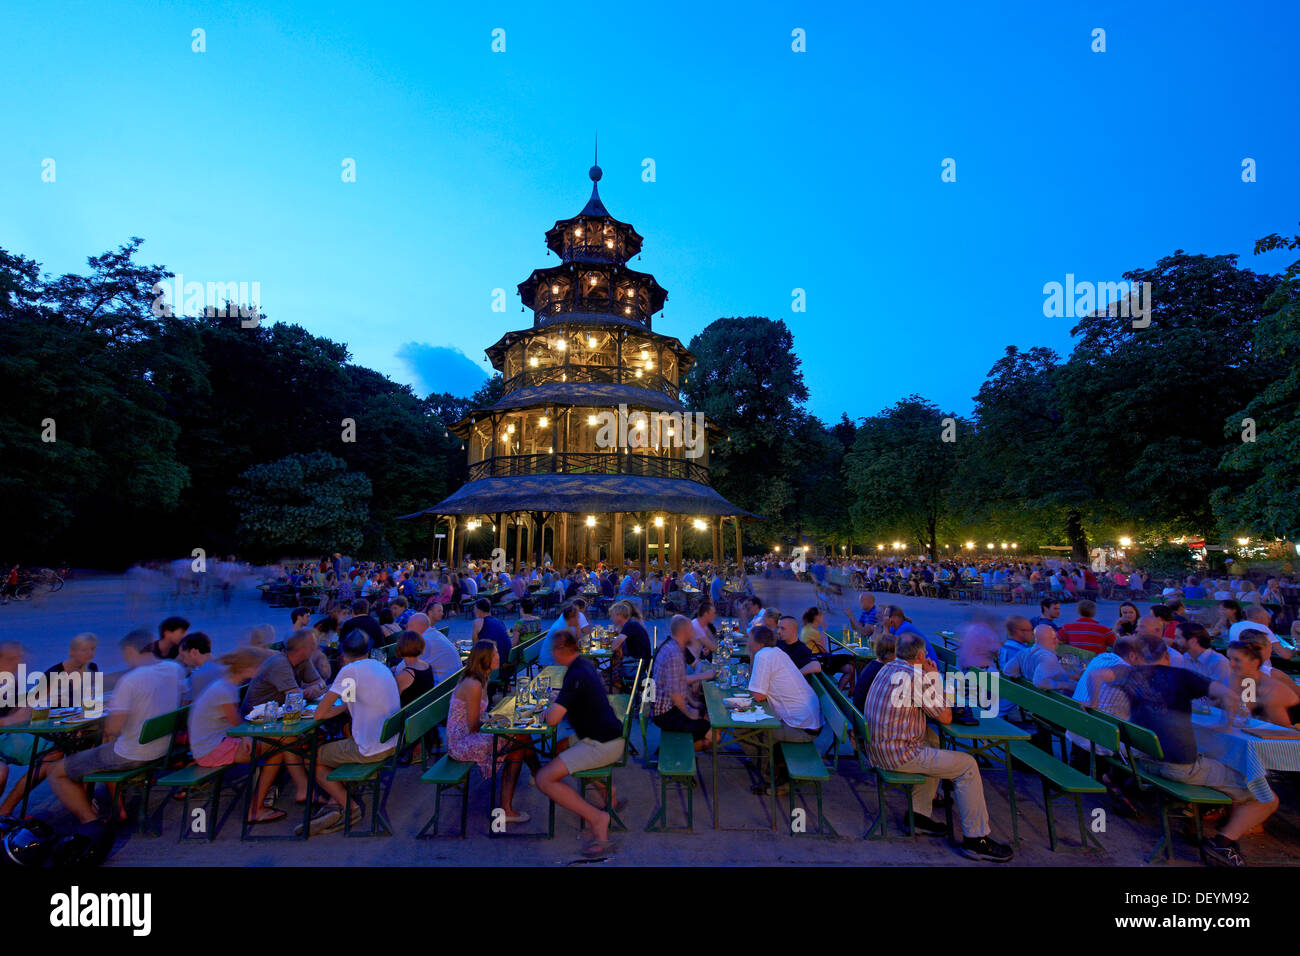 Beer Garden At The Chinese Tower In The English Garden Munich Upper